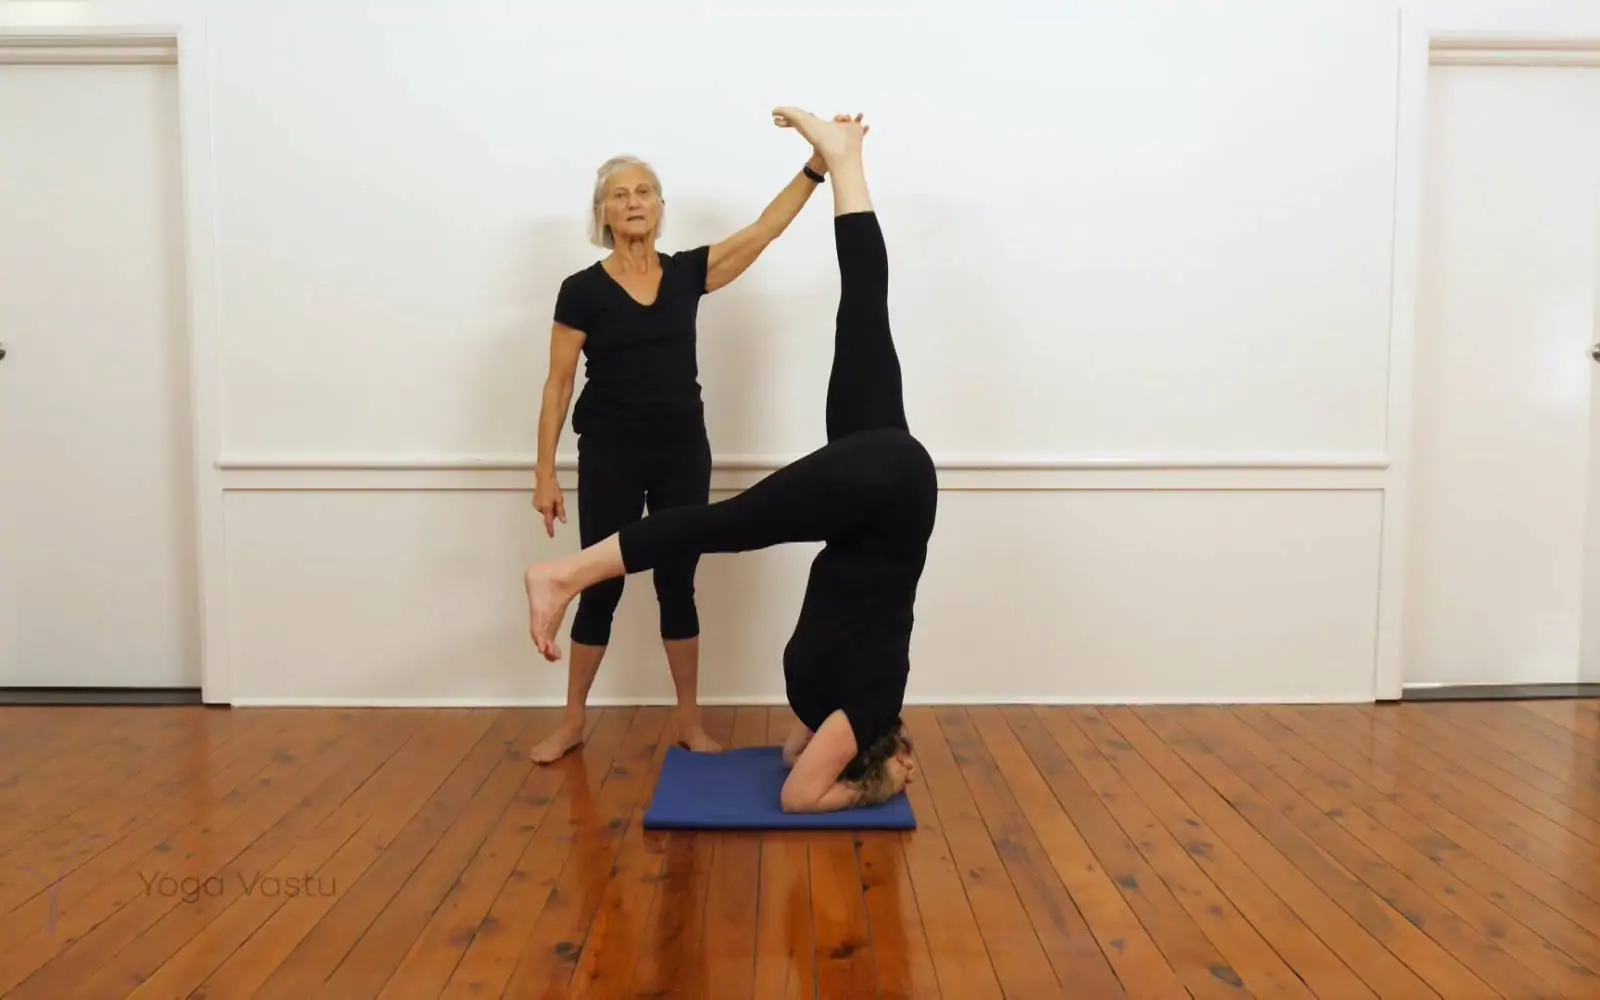 How to Do the Headstand Pose in Yoga Without Kicking Your Way Up | SELF